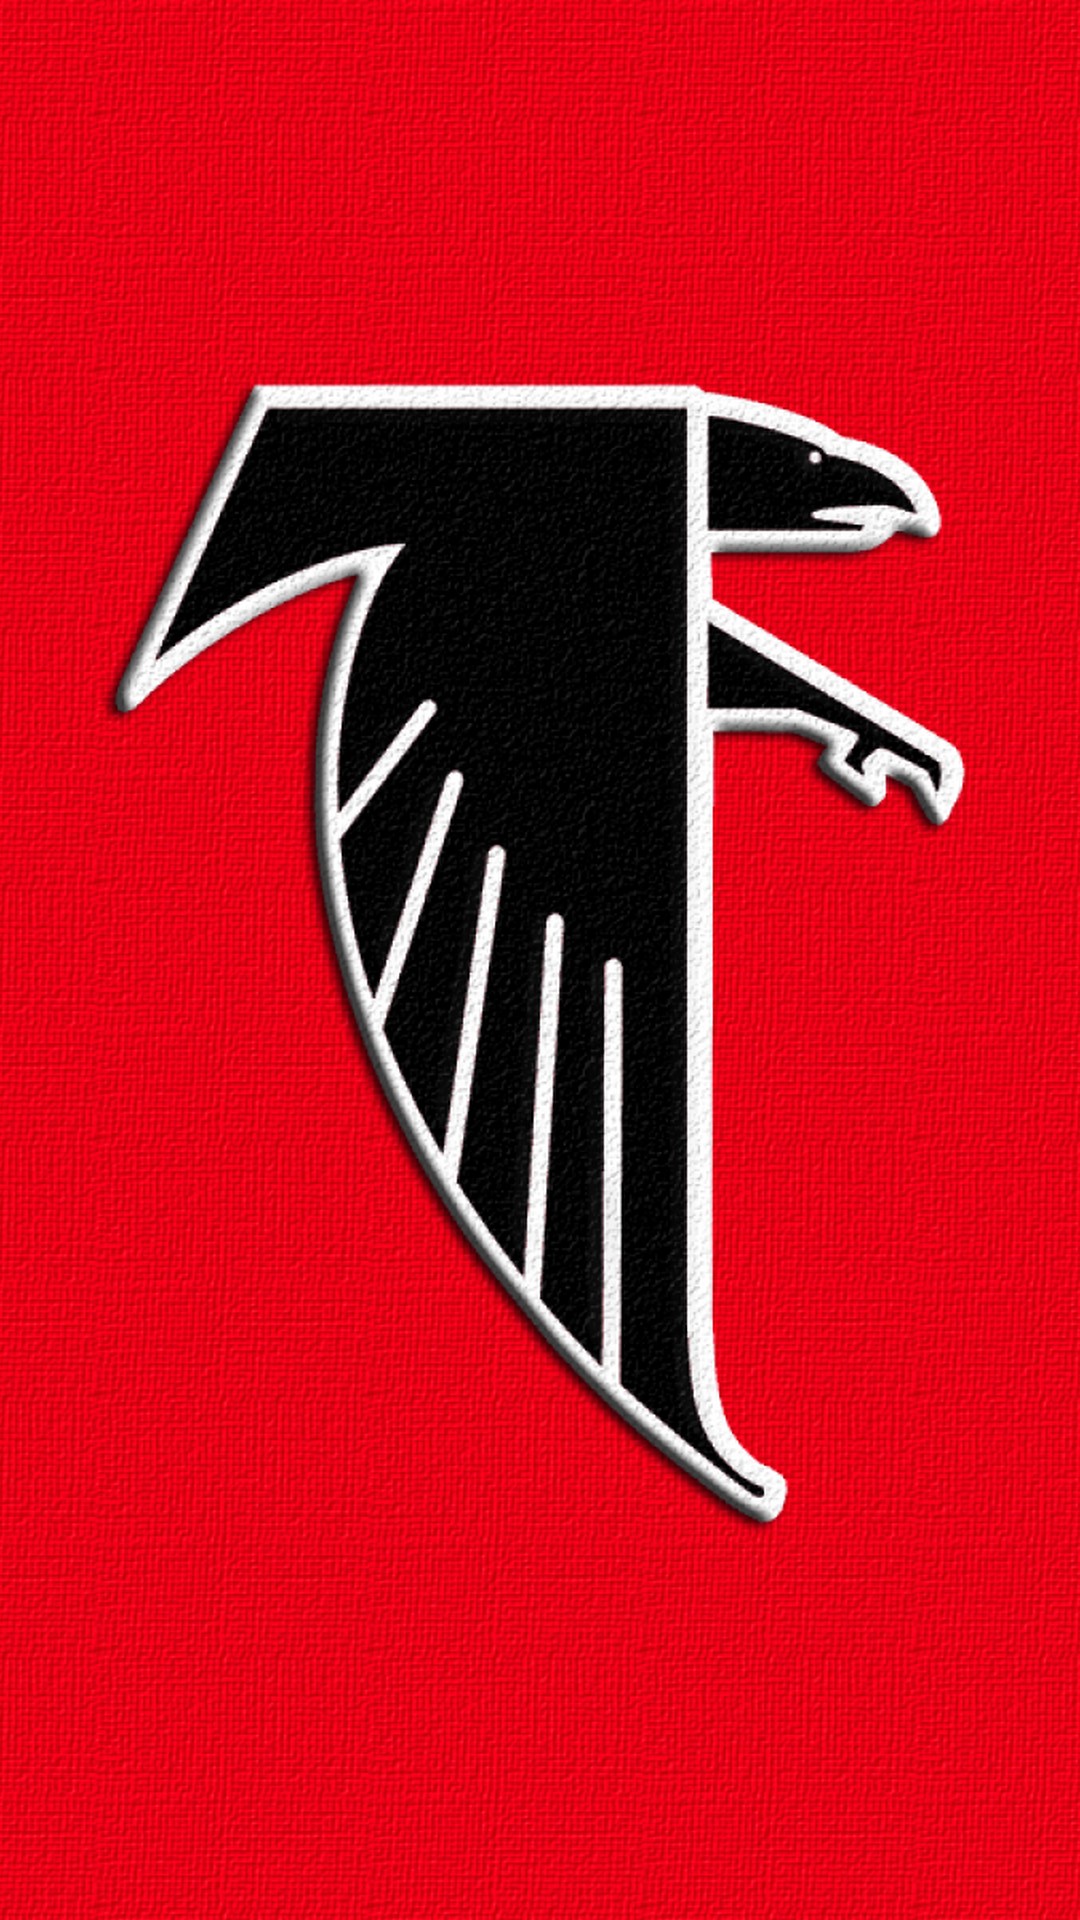 Atlanta Falcons iPhone Wallpaper in HD With high-resolution 1080X1920 pixel. Download and set as wallpaper for Apple iPhone X, XS Max, XR, 8, 7, 6, SE, iPad, Android